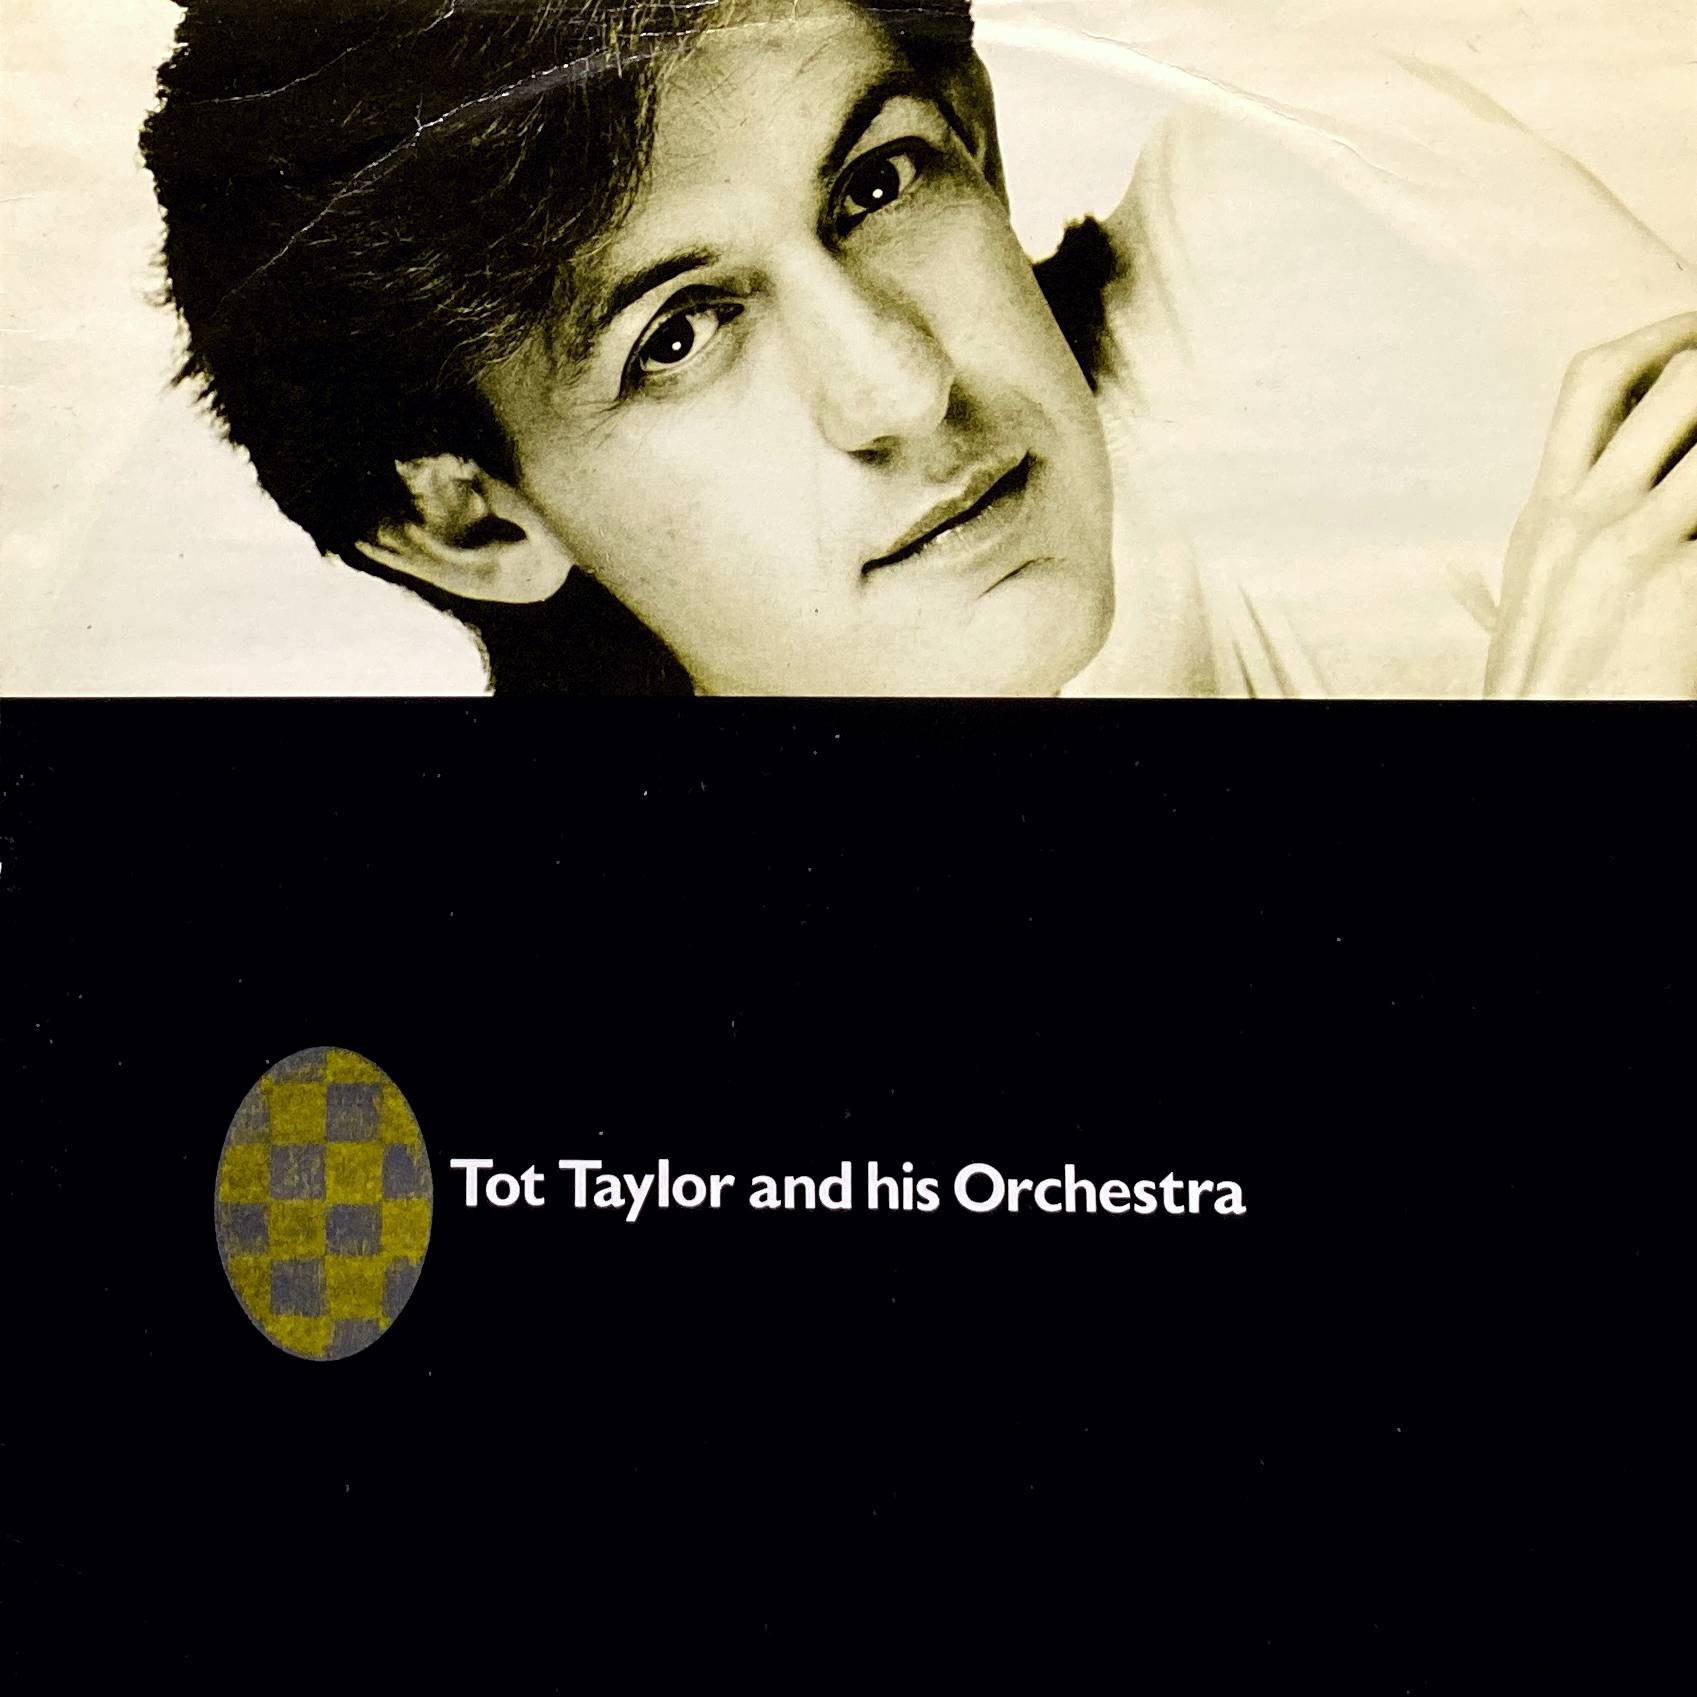 TOT TAYLOR AND HIS ORCHESTRA